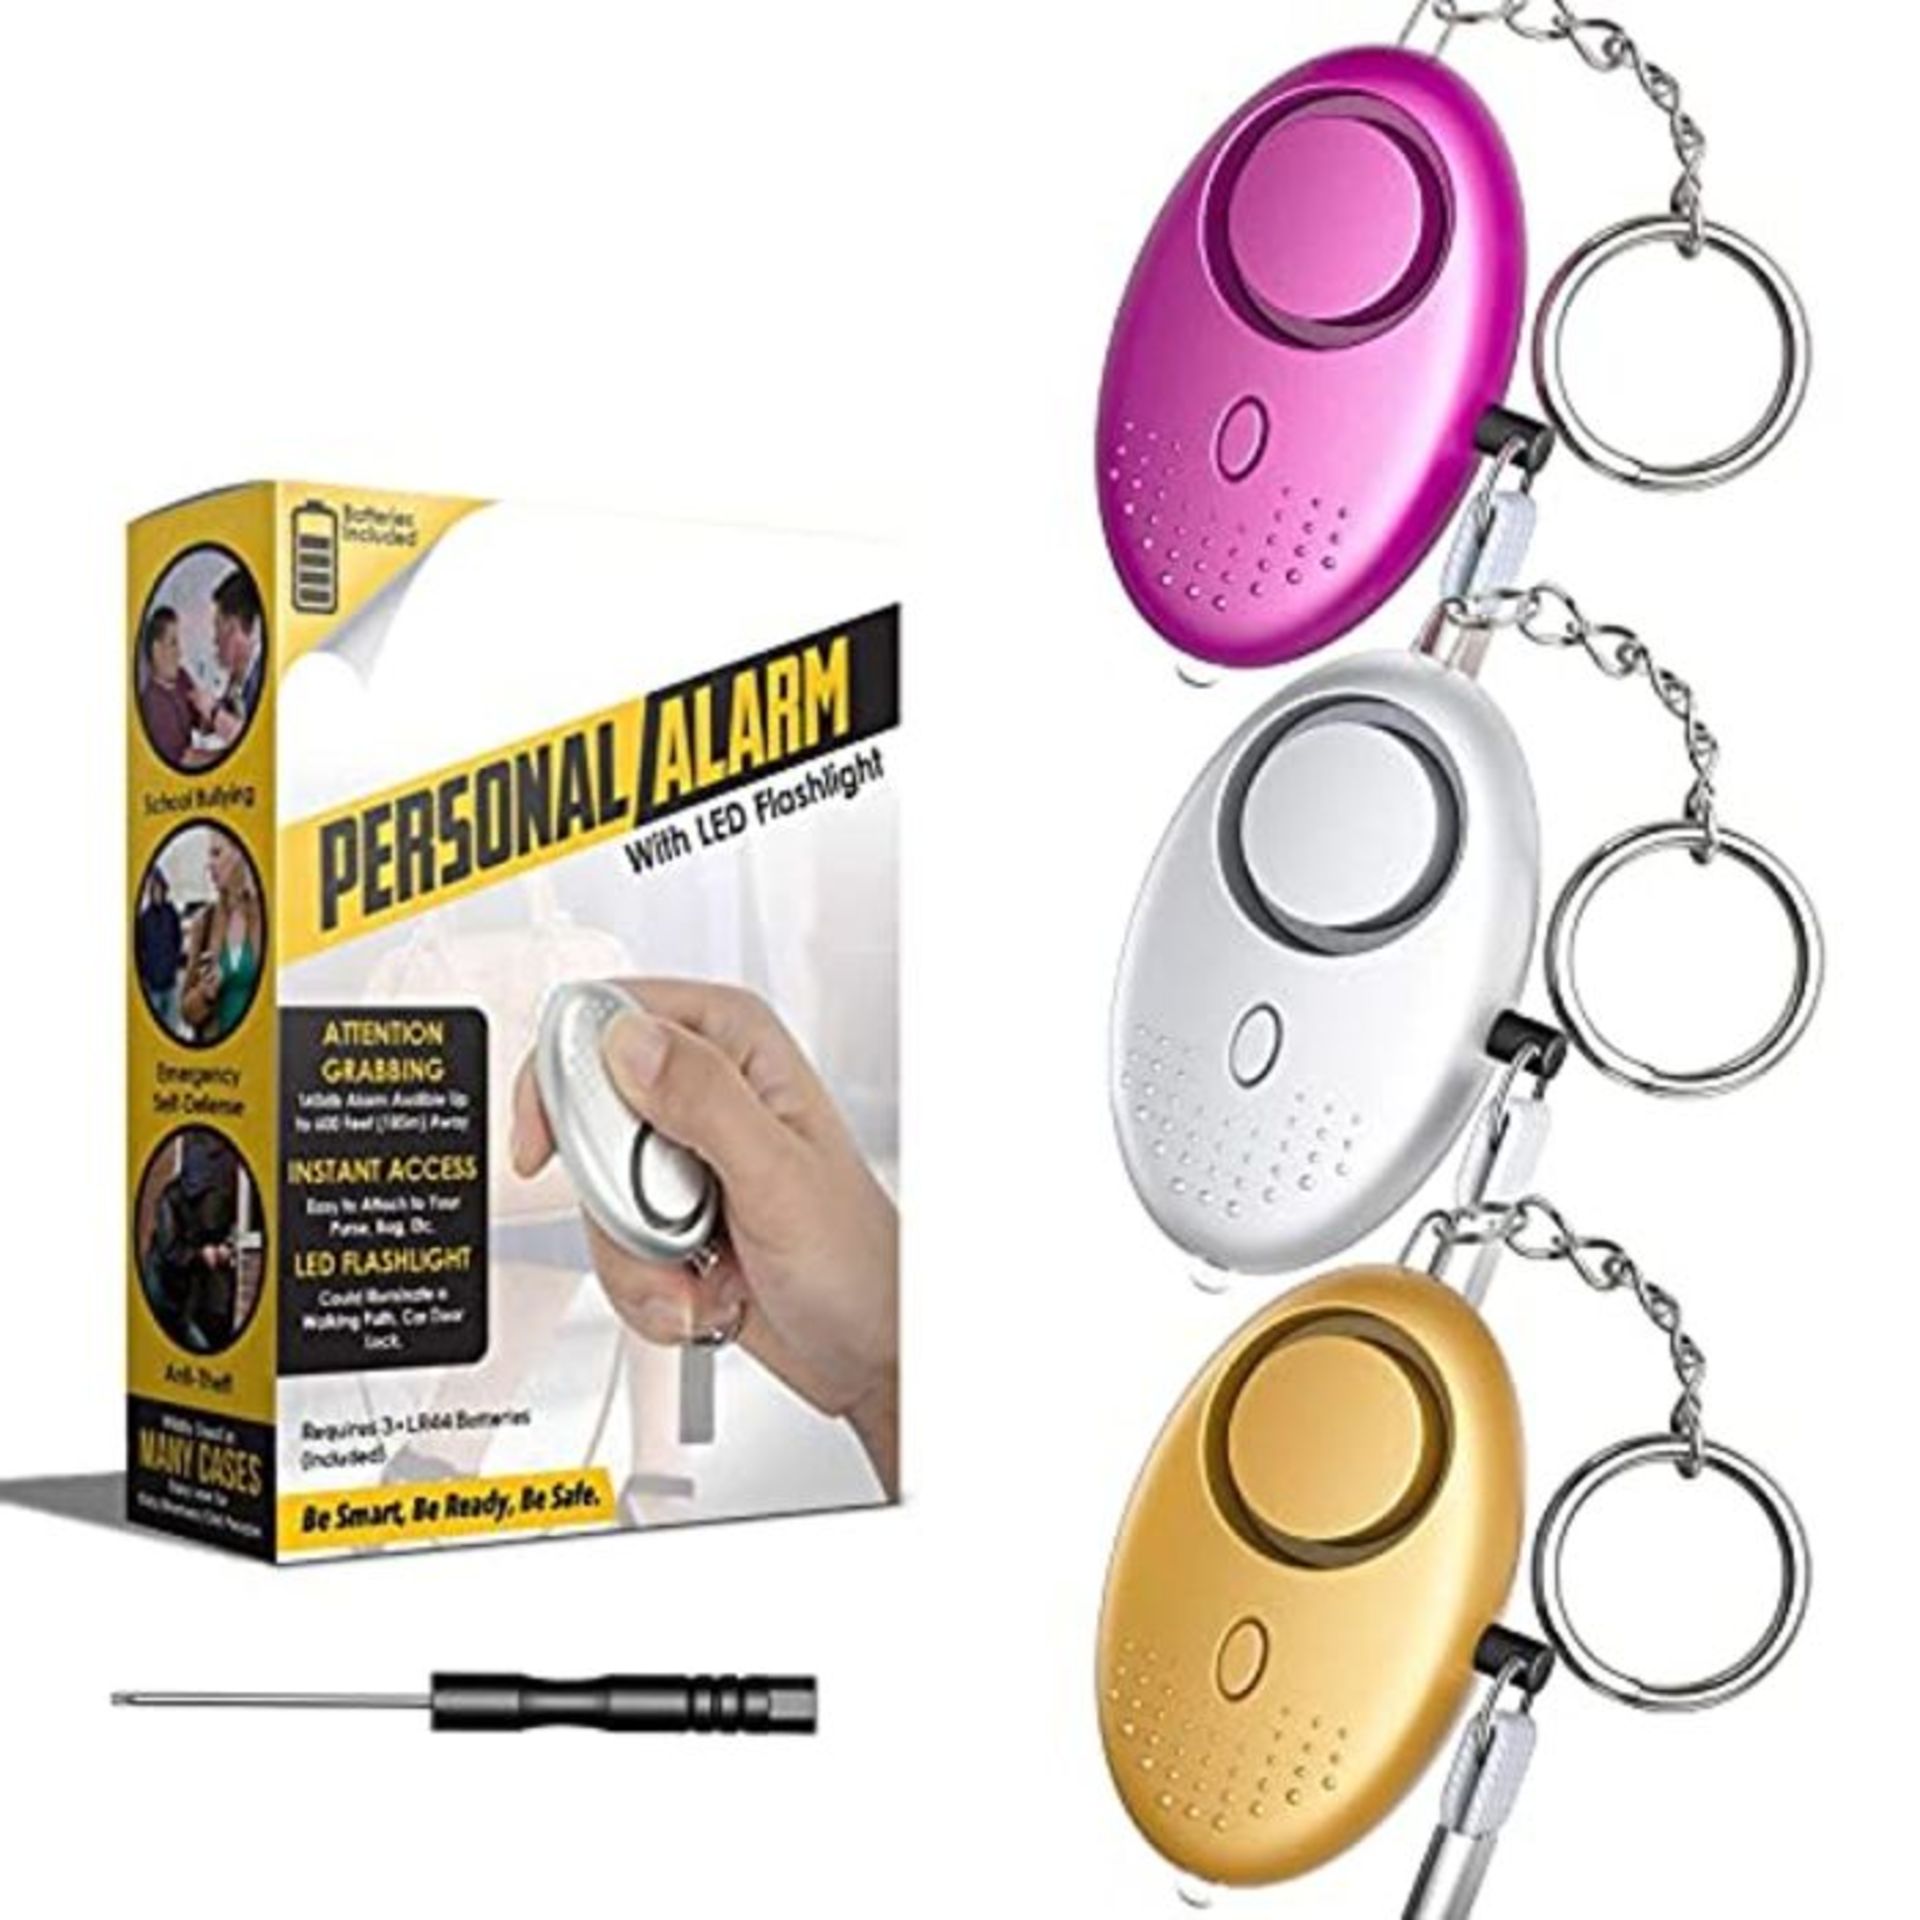 Personal Alarm, 140dB Police Approved Security Sirens Keychain with Flashlight, Panic